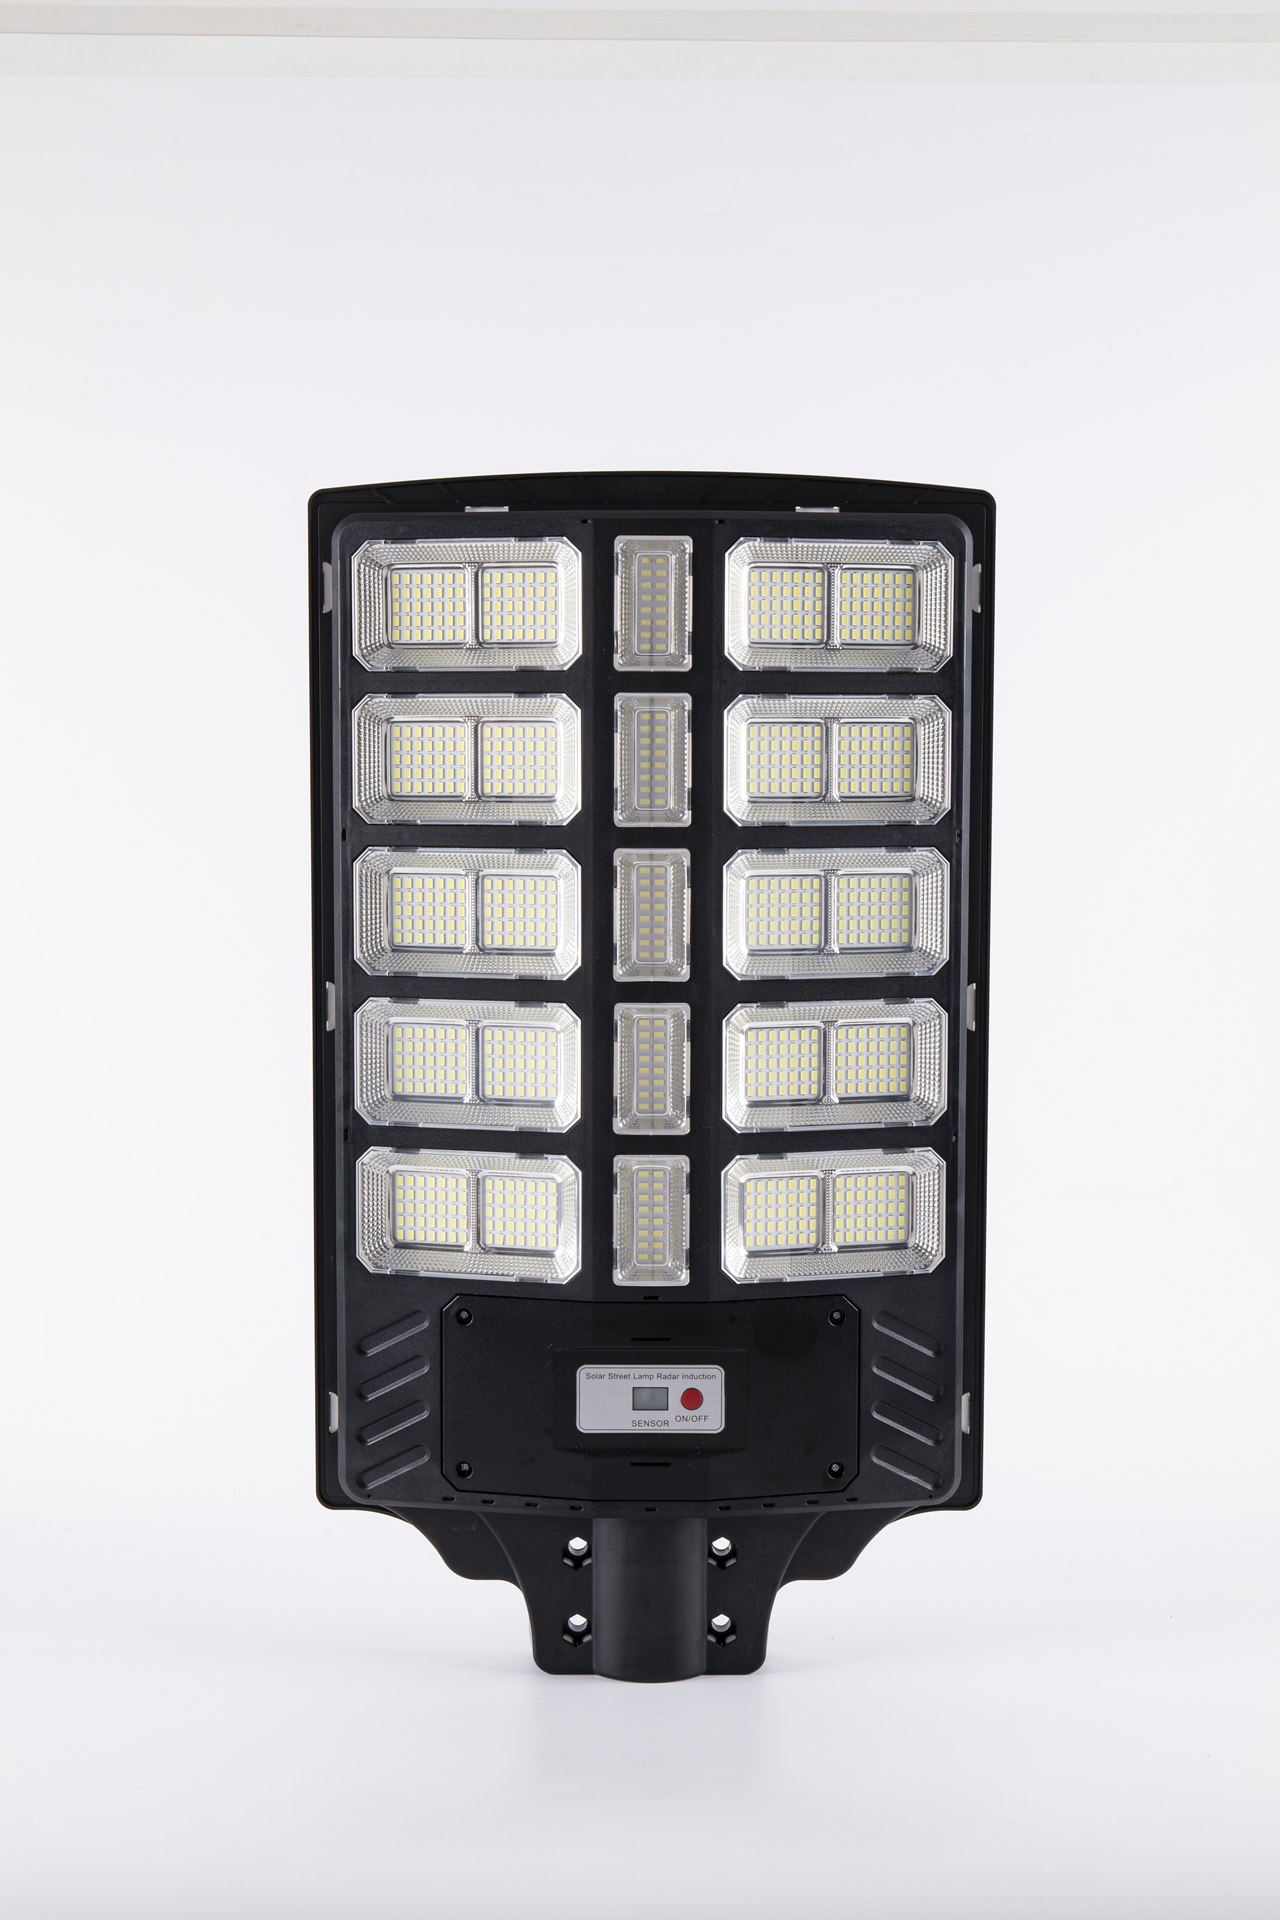 800KW Super Bright Wide Angle Solar Street Light Outdoor with Motion Sensor for Parking Lot Yard Ga